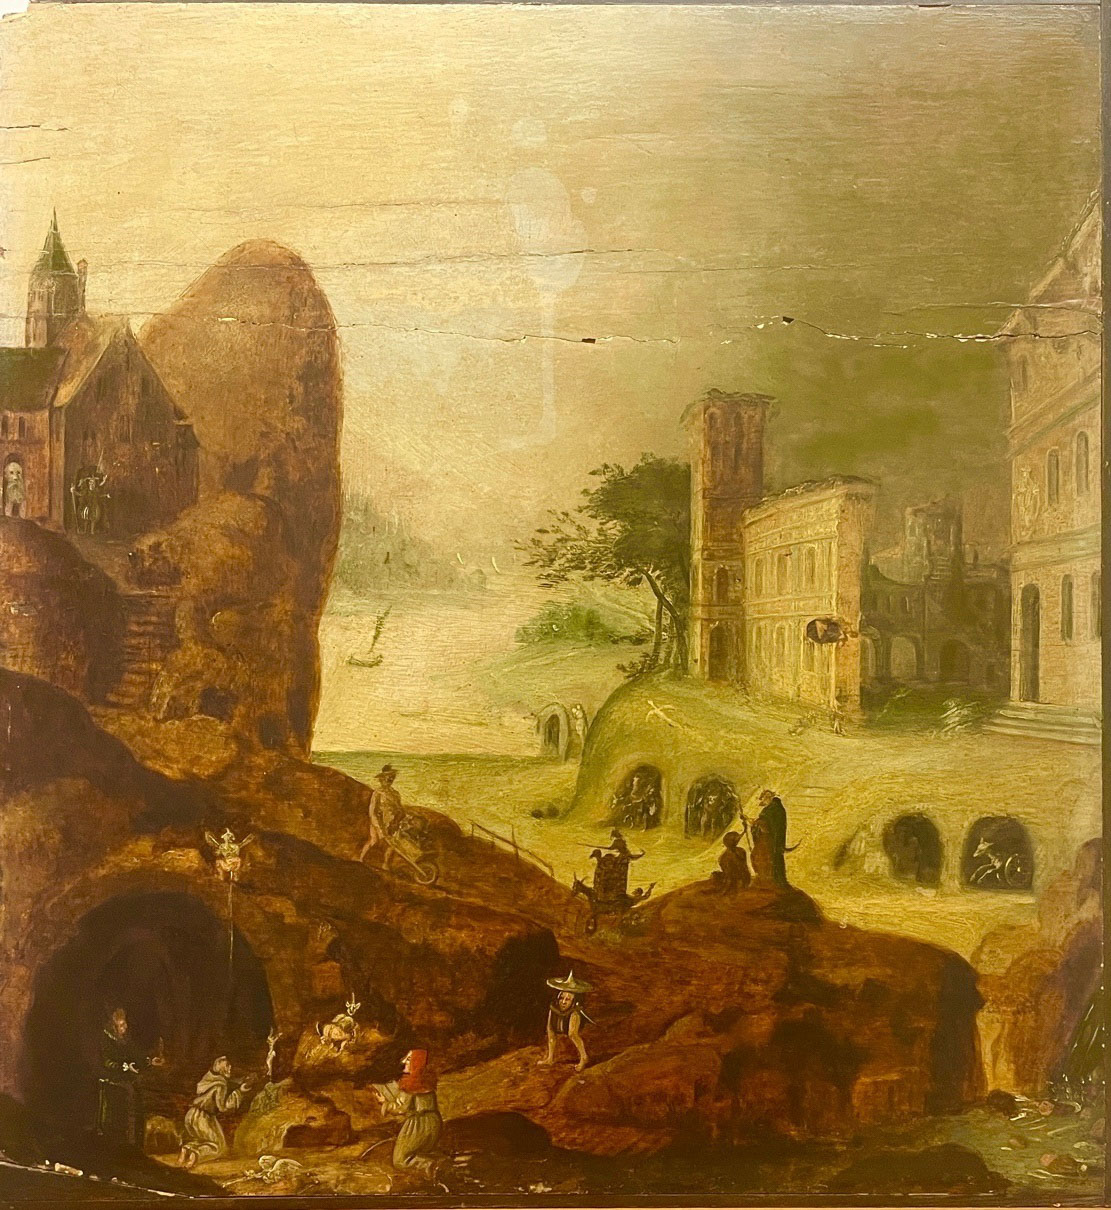 Anonymous landscape and genre painter of the 17th century. Landscape with palace architecture and